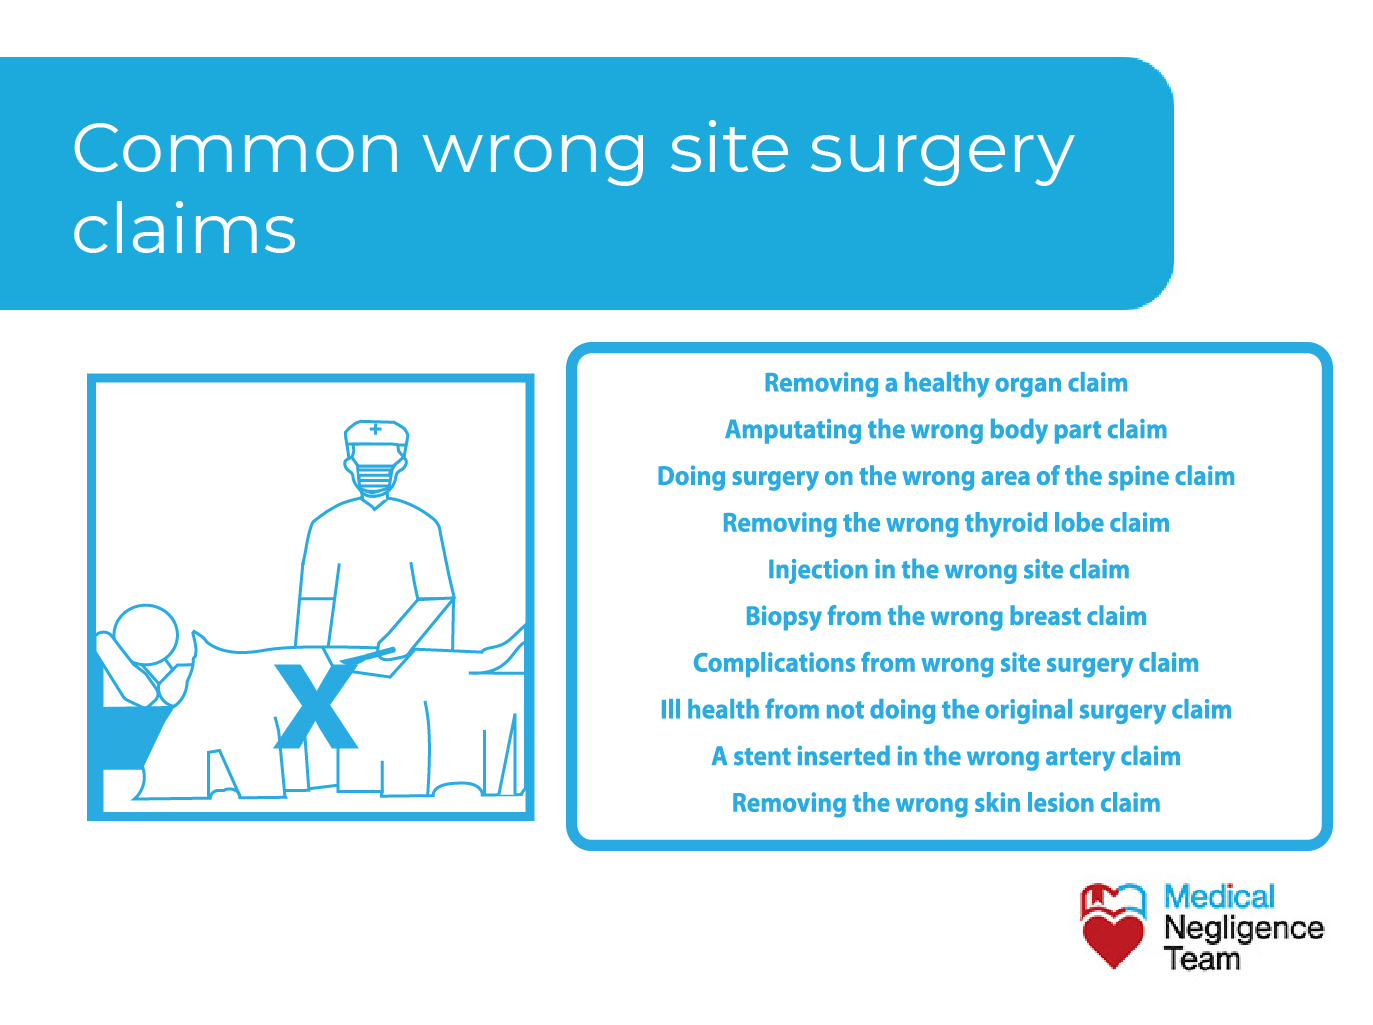 Common wrong site surgery claims